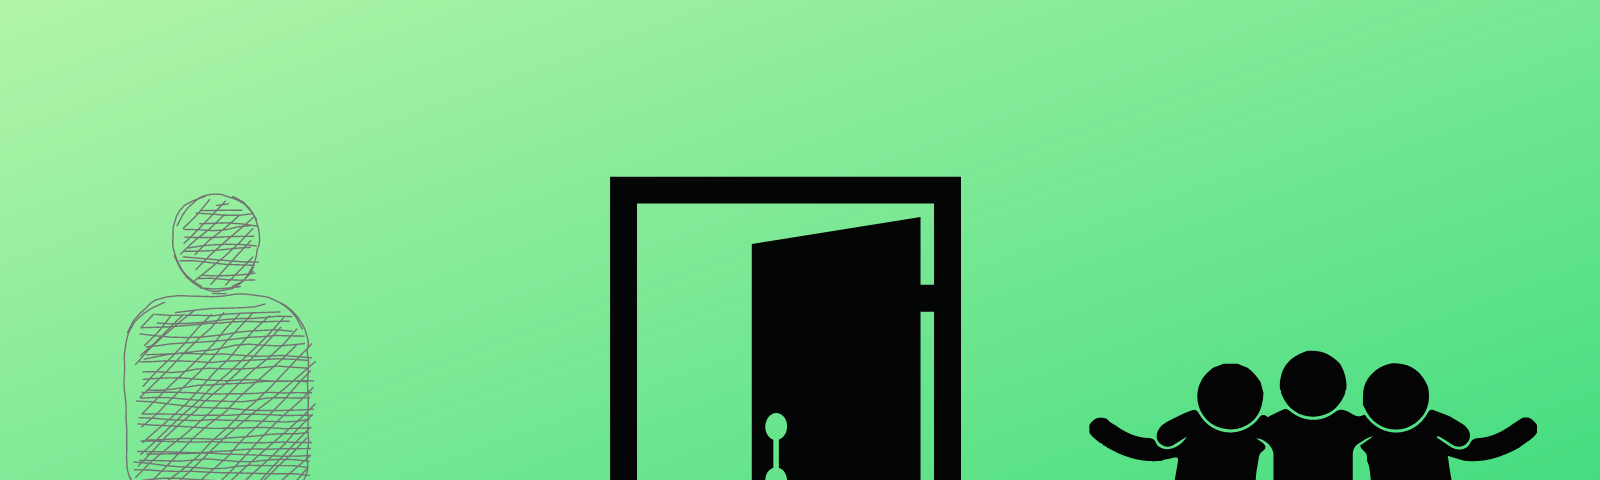 Lime green gradient with illustrations of open door separating a crowd of happy black stick figures from a crosshatch gray stick figure to represent aro flag colors